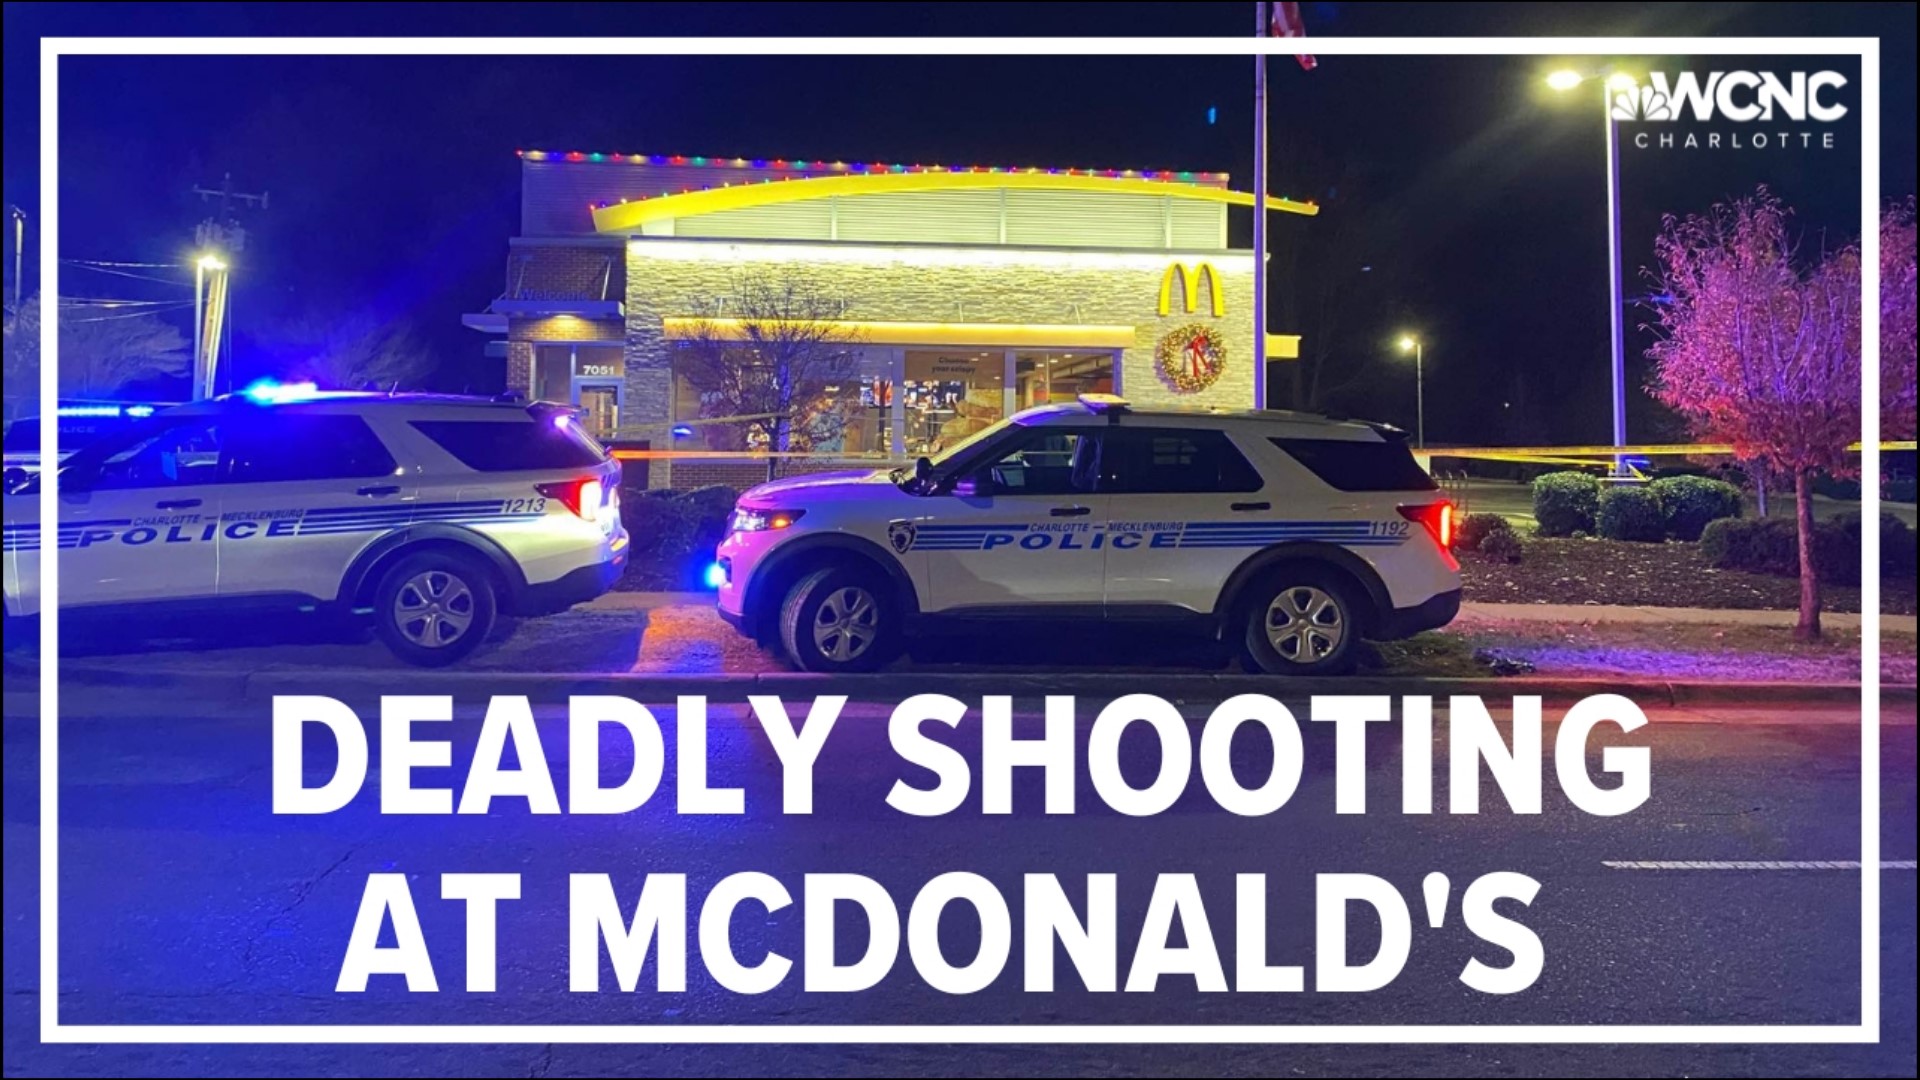 CMPD was on the scene of a deadly shooting at a McDonald's.